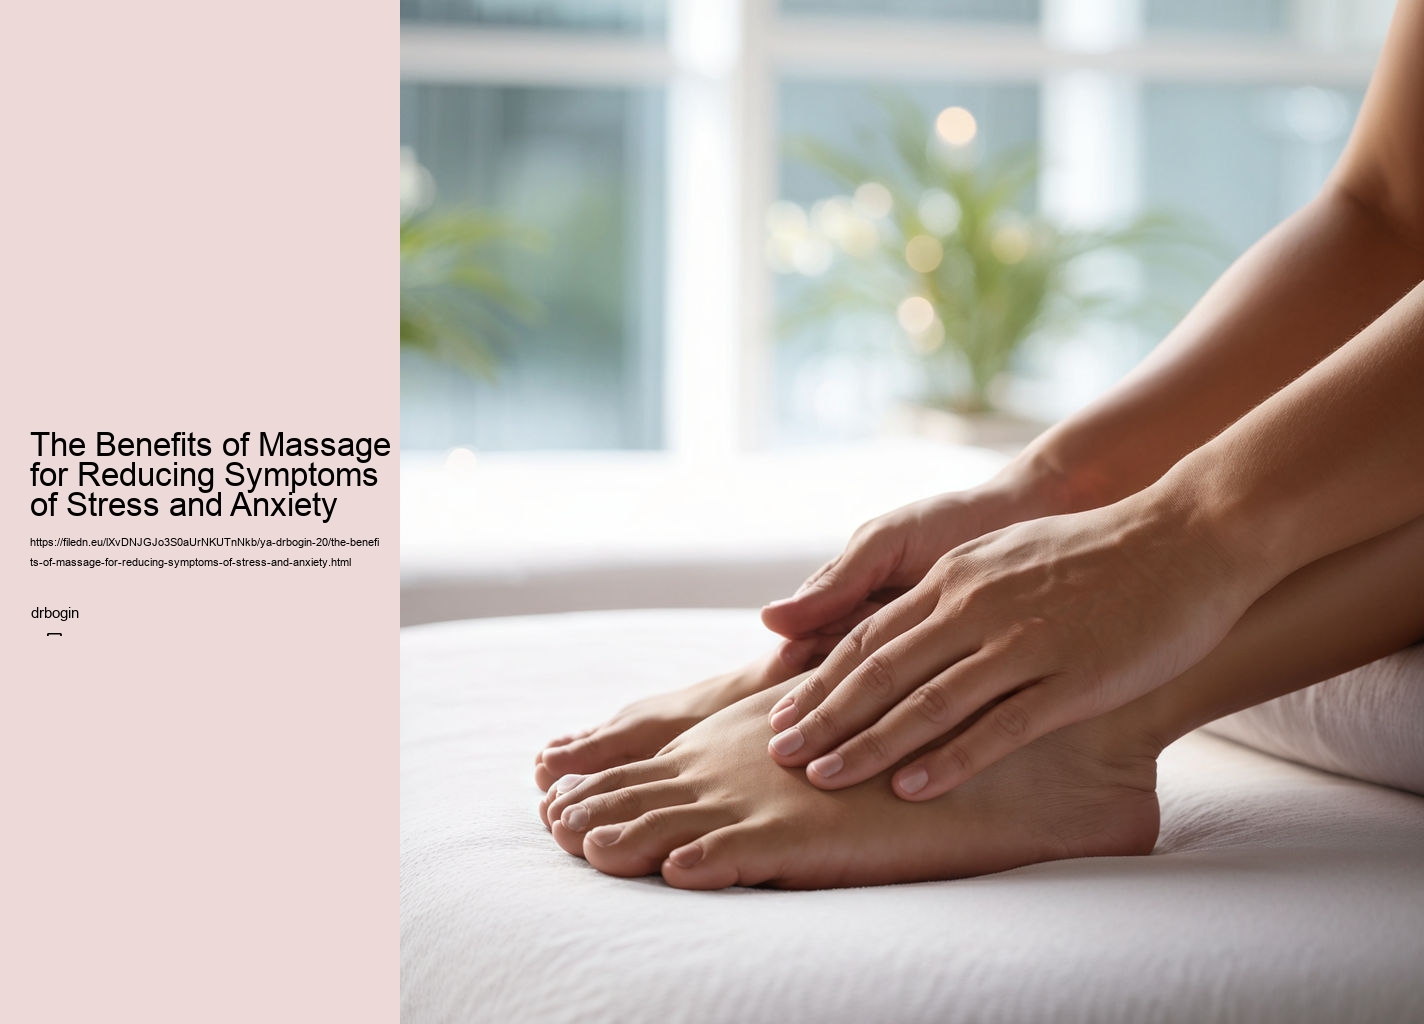 The Benefits of Massage for Reducing Symptoms of Stress and Anxiety